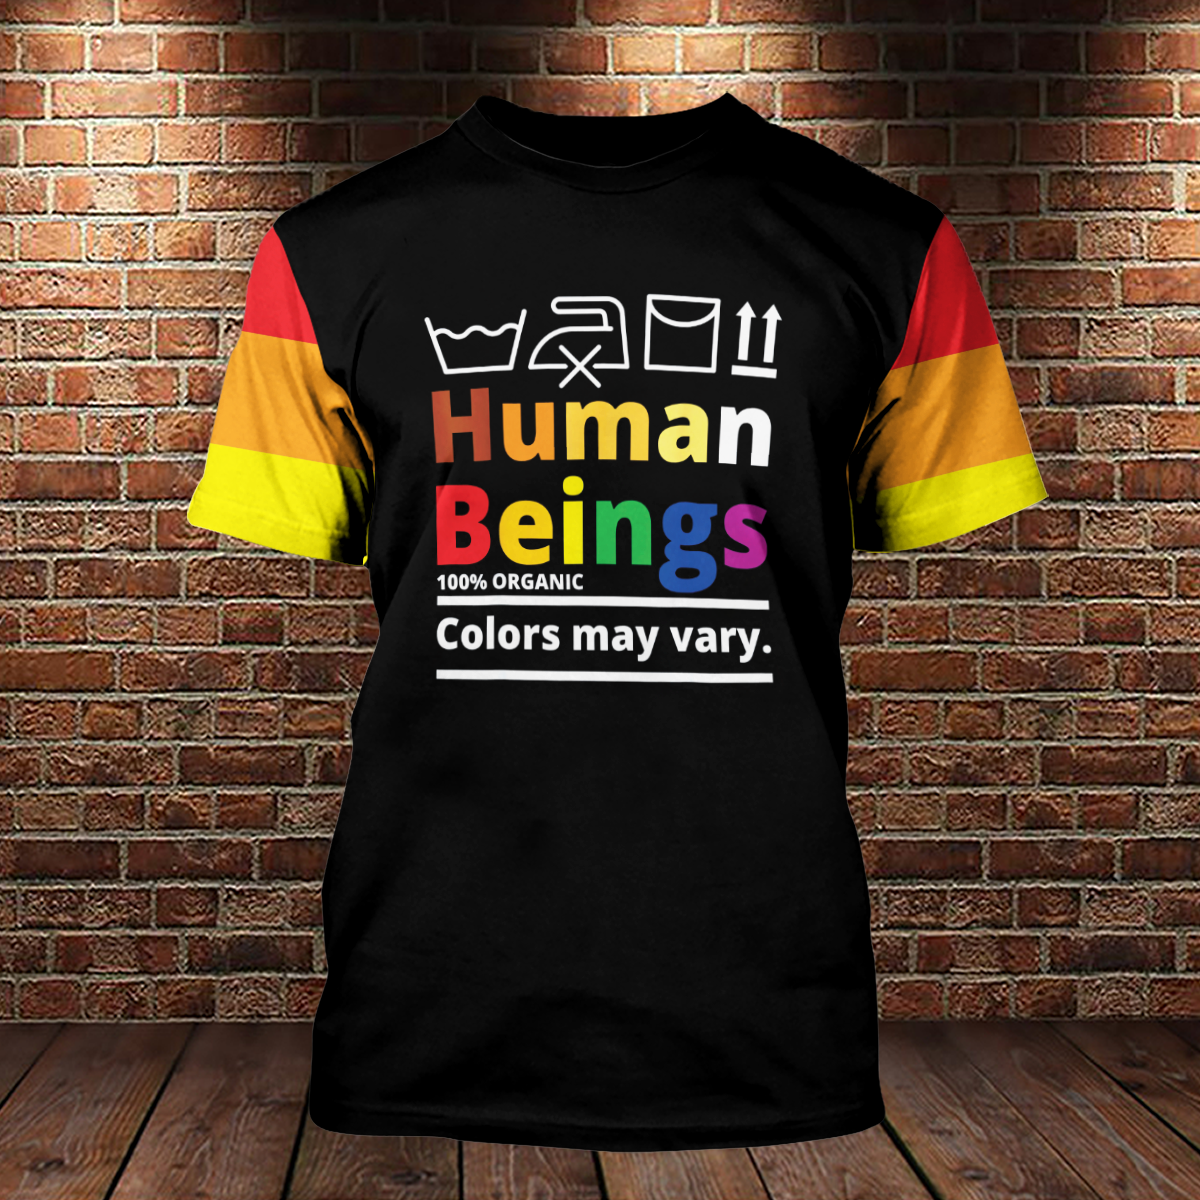 LGBT Shirt Human Beings Colors May Vary 3D Shirts For LGBT/ Bisexual Shirts For LGBT History Month